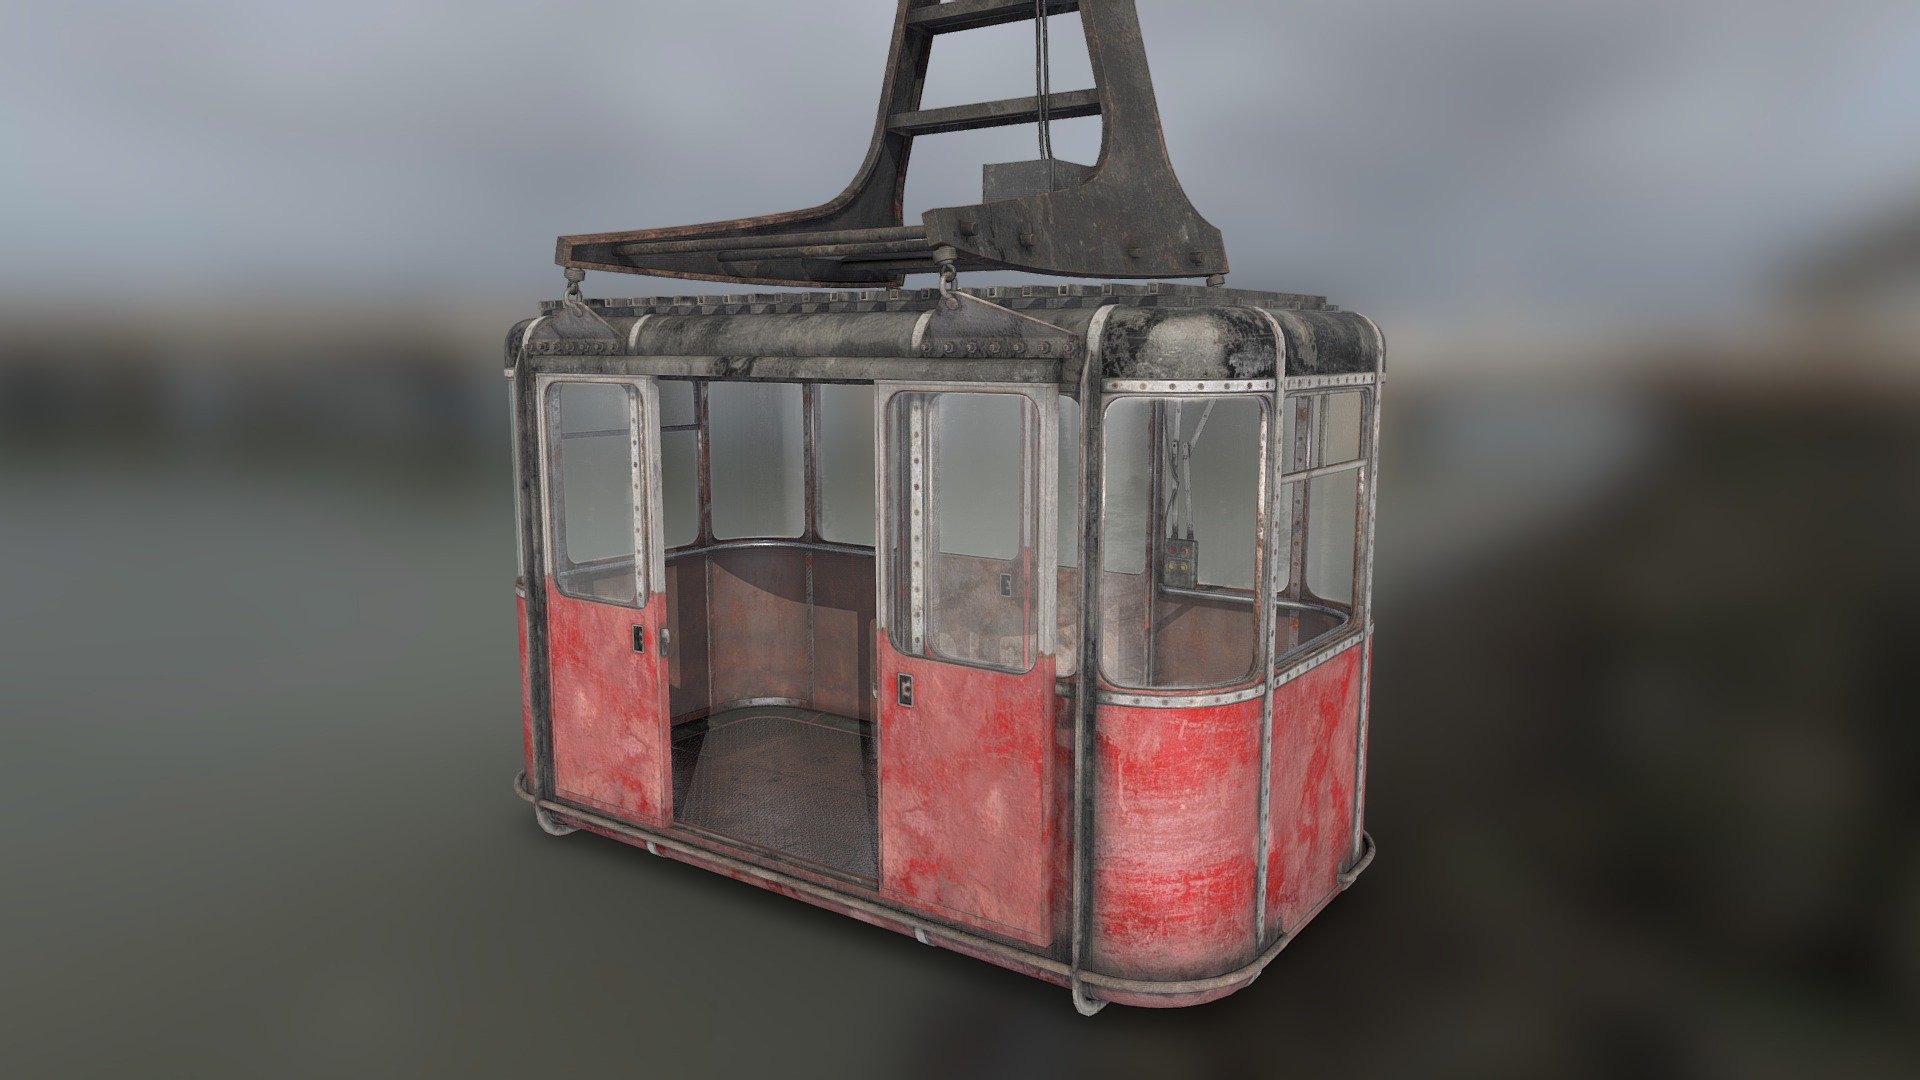 Game asset for a game I'm working on.
Modelled in Blender and textured using Quixel 2.0 - Cable Car - 3D model by Skan 3d model